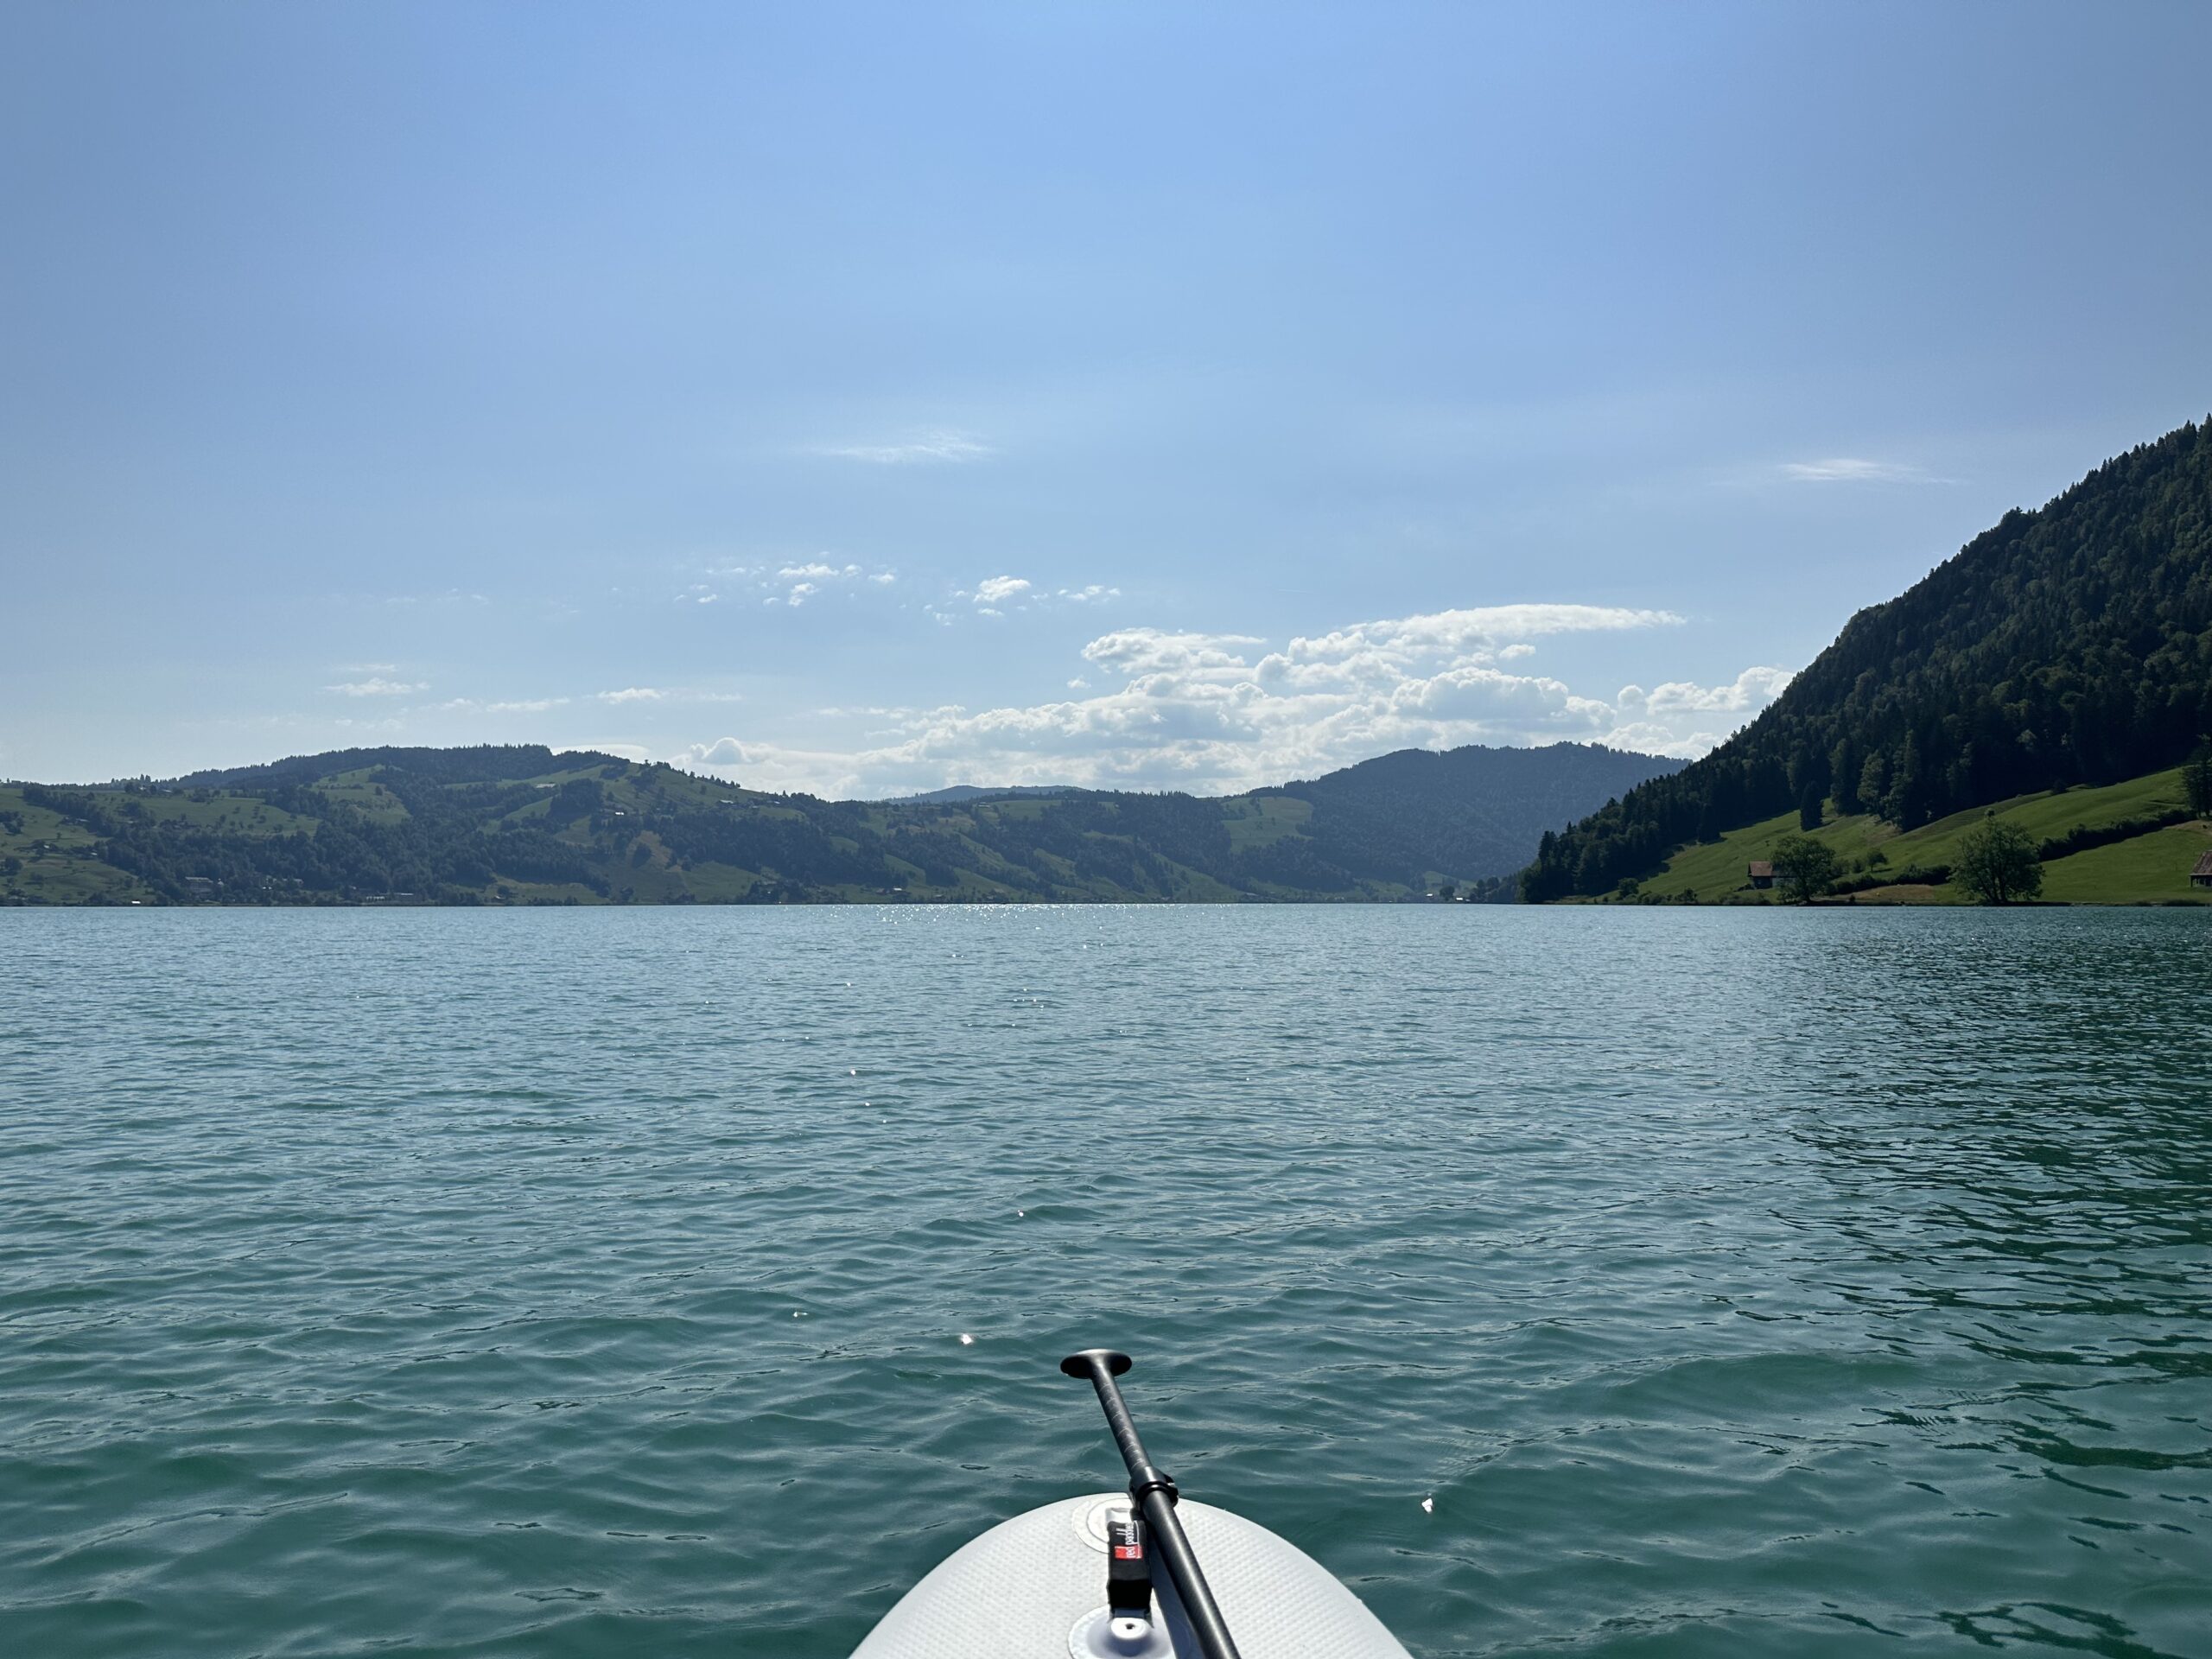 View of lake with stand up paddle in the foreground and forested hills in the background.